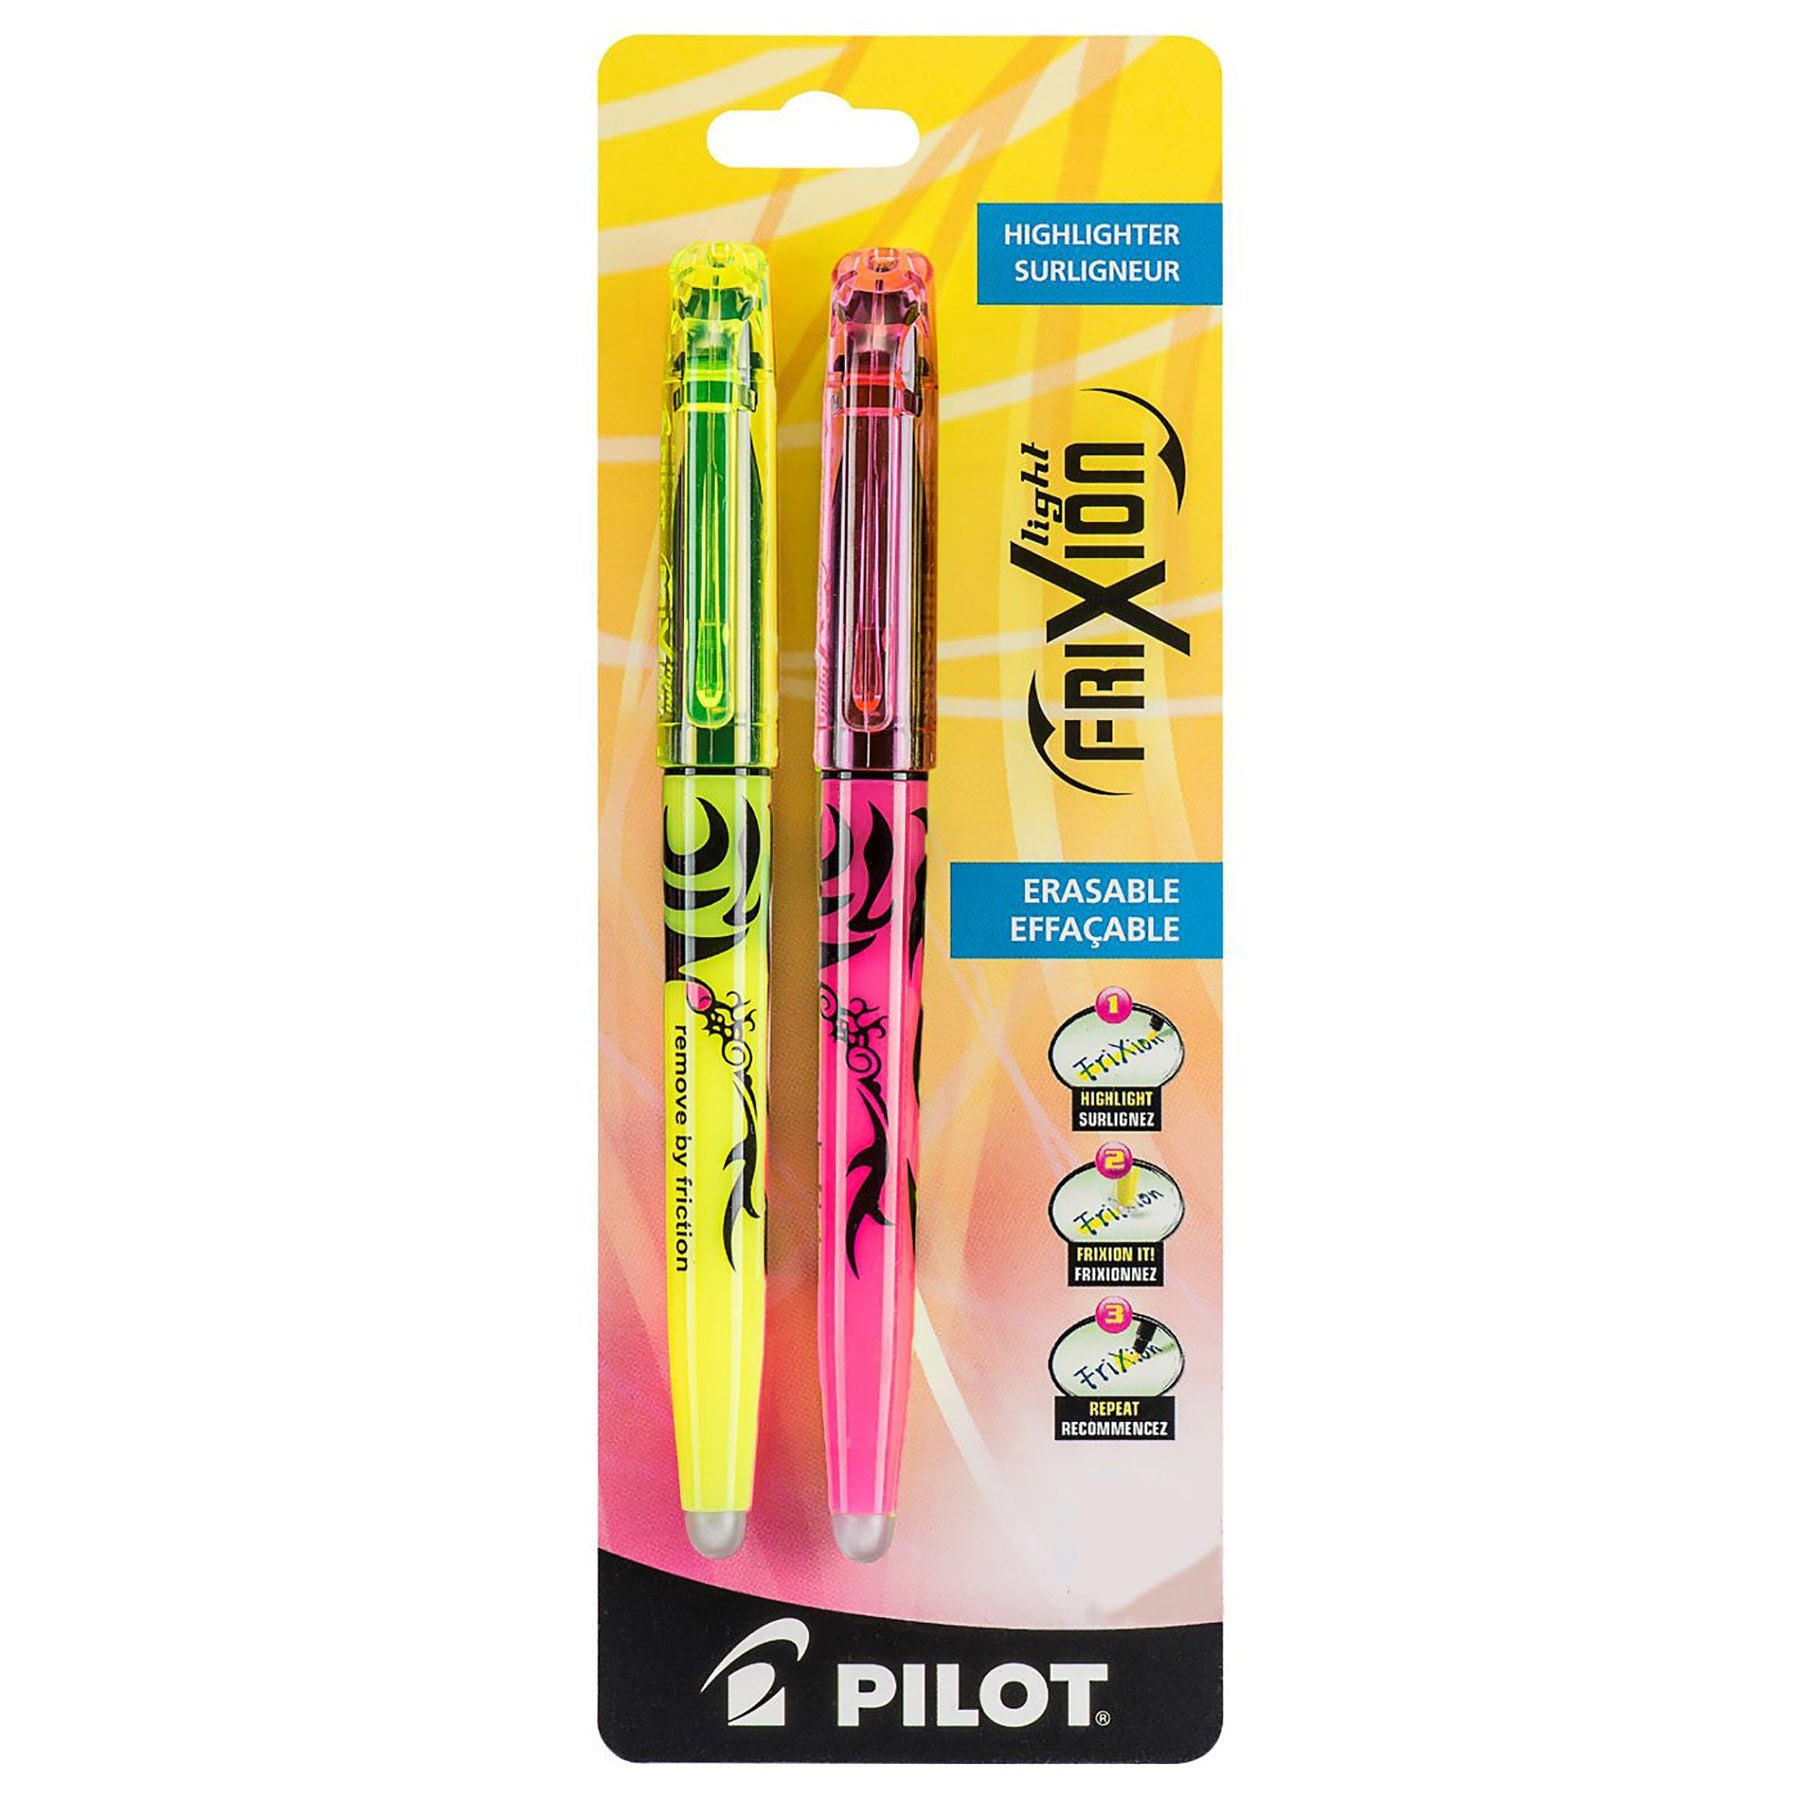 Pilot Frixion 2 Erasable Highlighters - Yellow and Pink